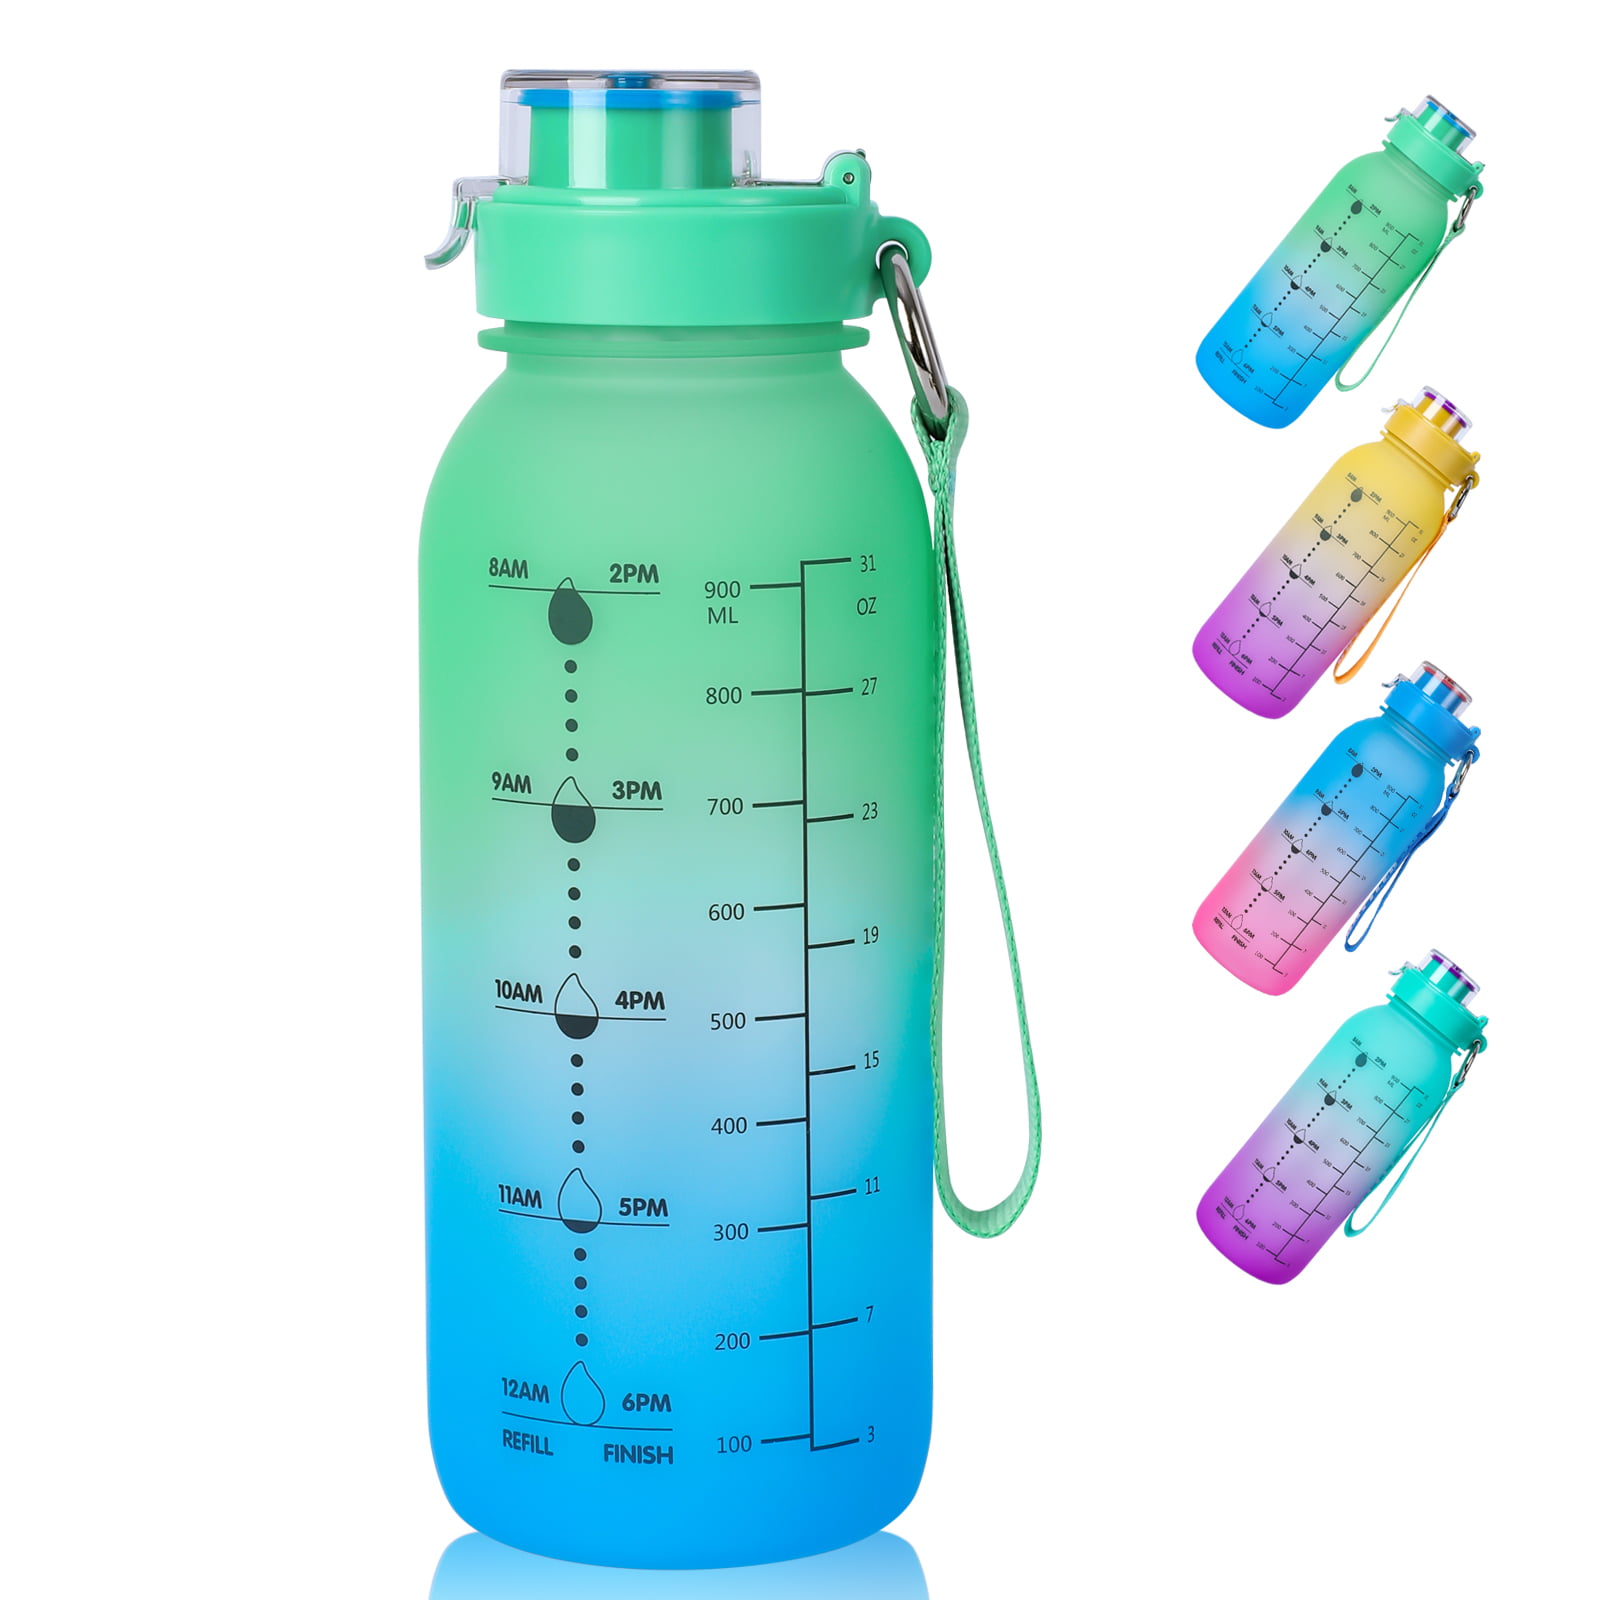 Bottle NOT INCLUDED. 3 Gallon Royal Blue TALL Water Bottle Carrier 